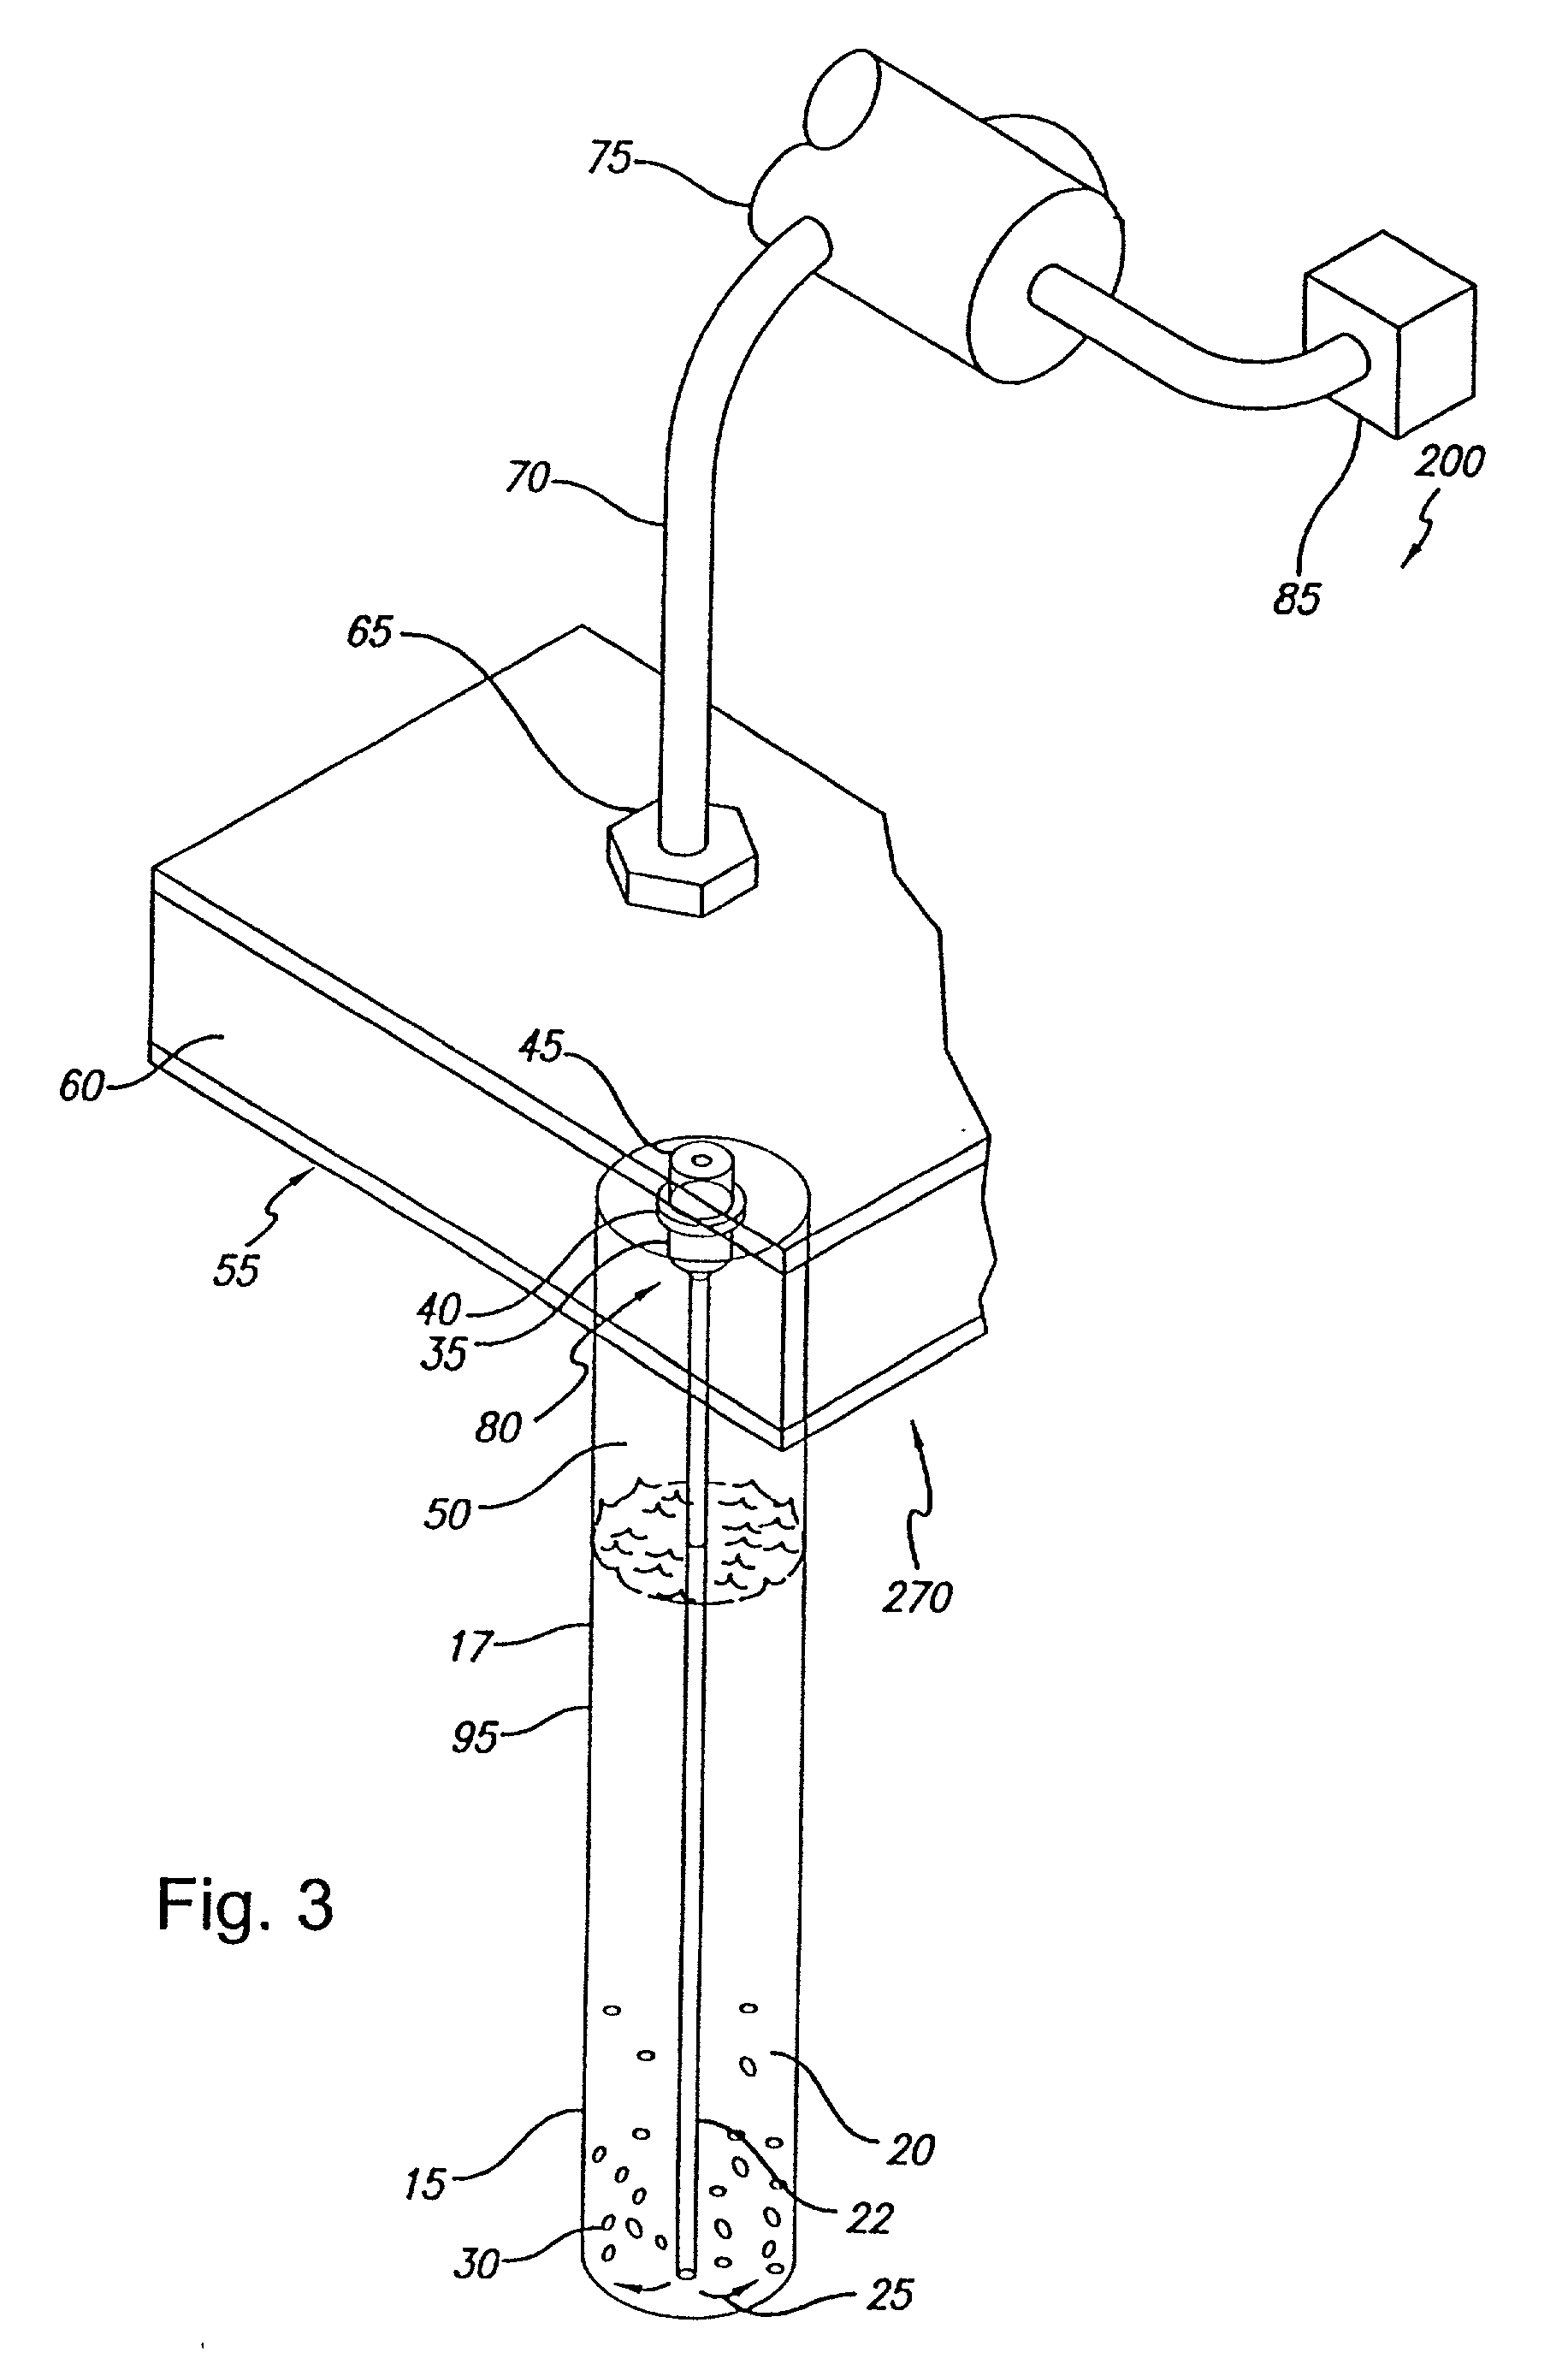 Method and apparatus for performing multiple processing steps on a sample in a single vessel